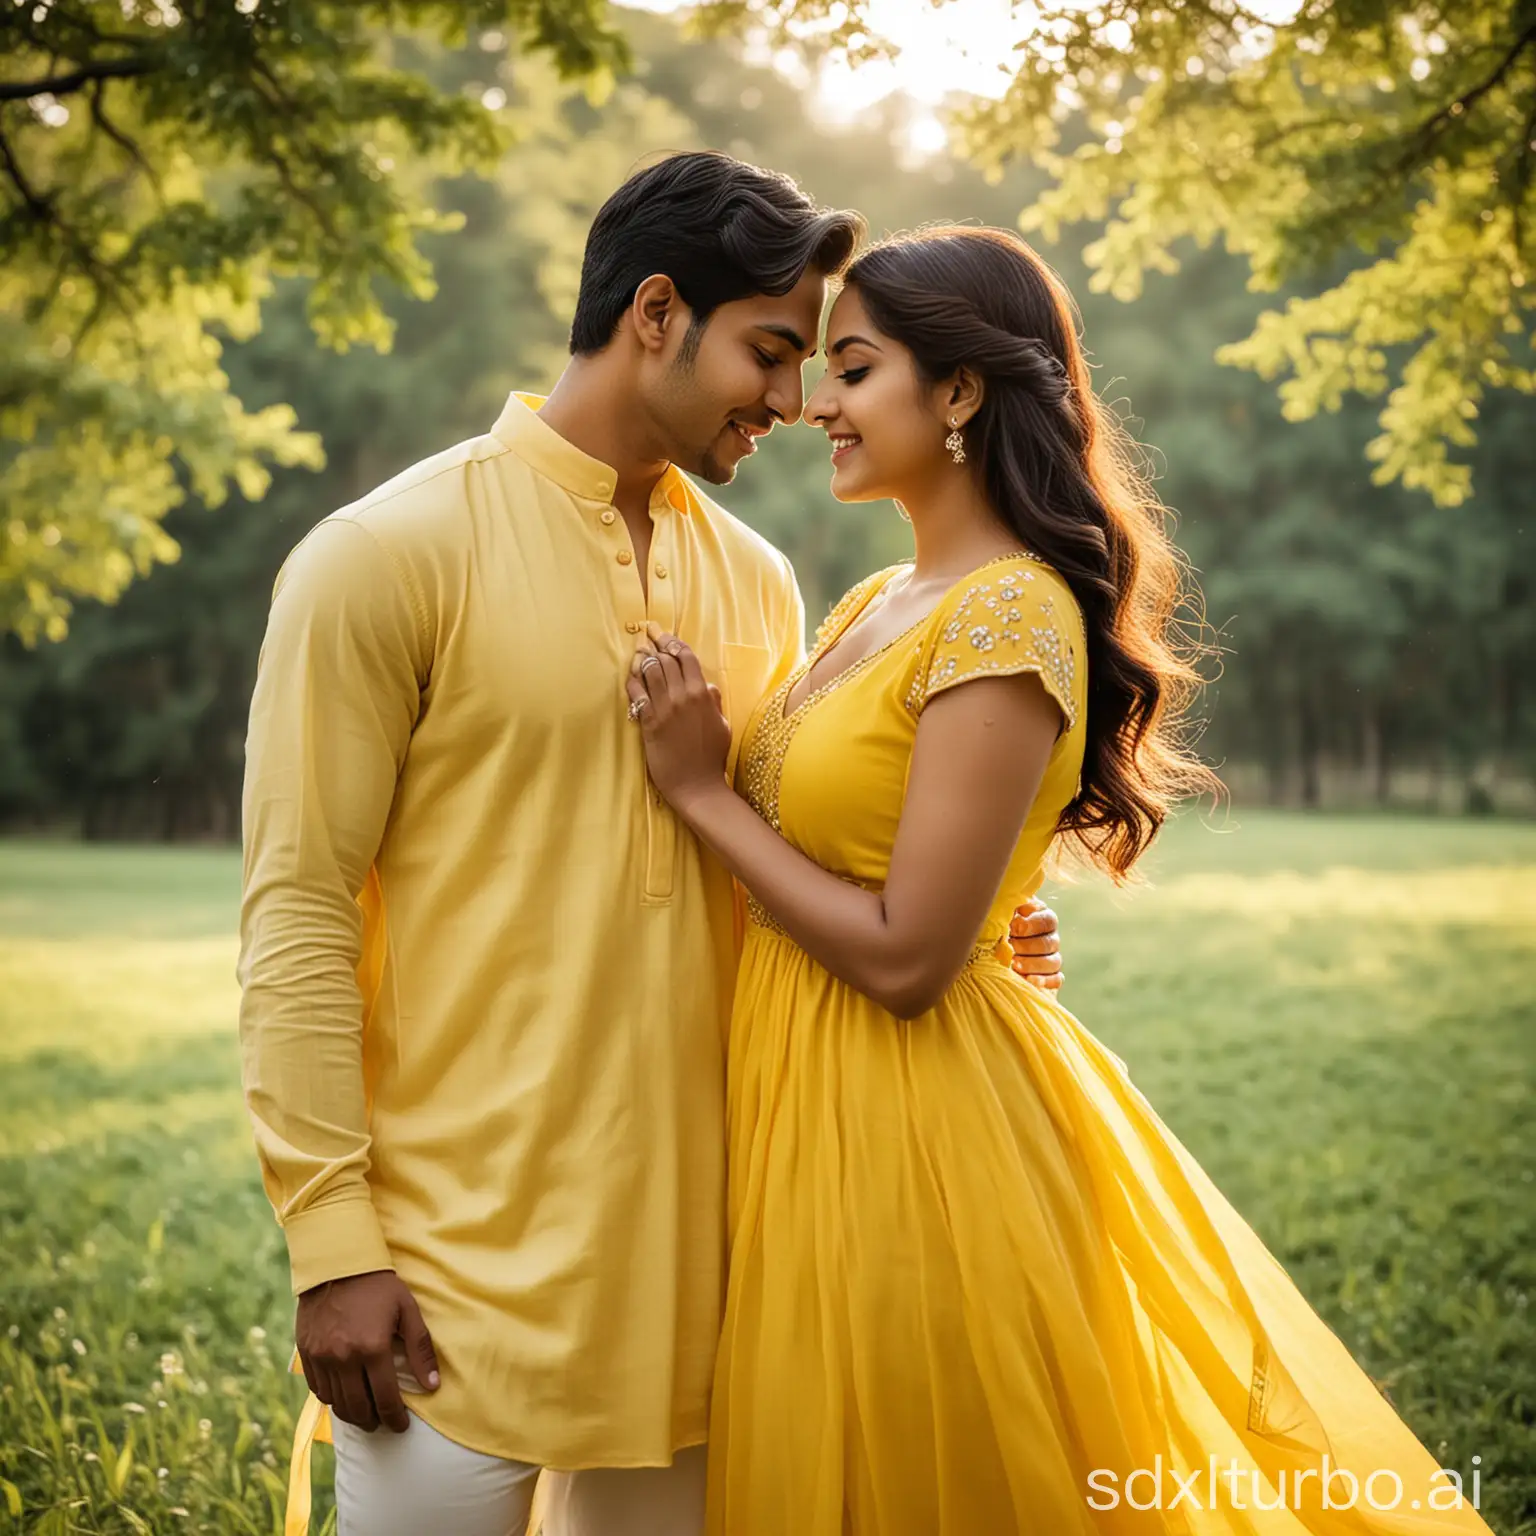 young indian couple romantic look, wearing yellow dress flowy